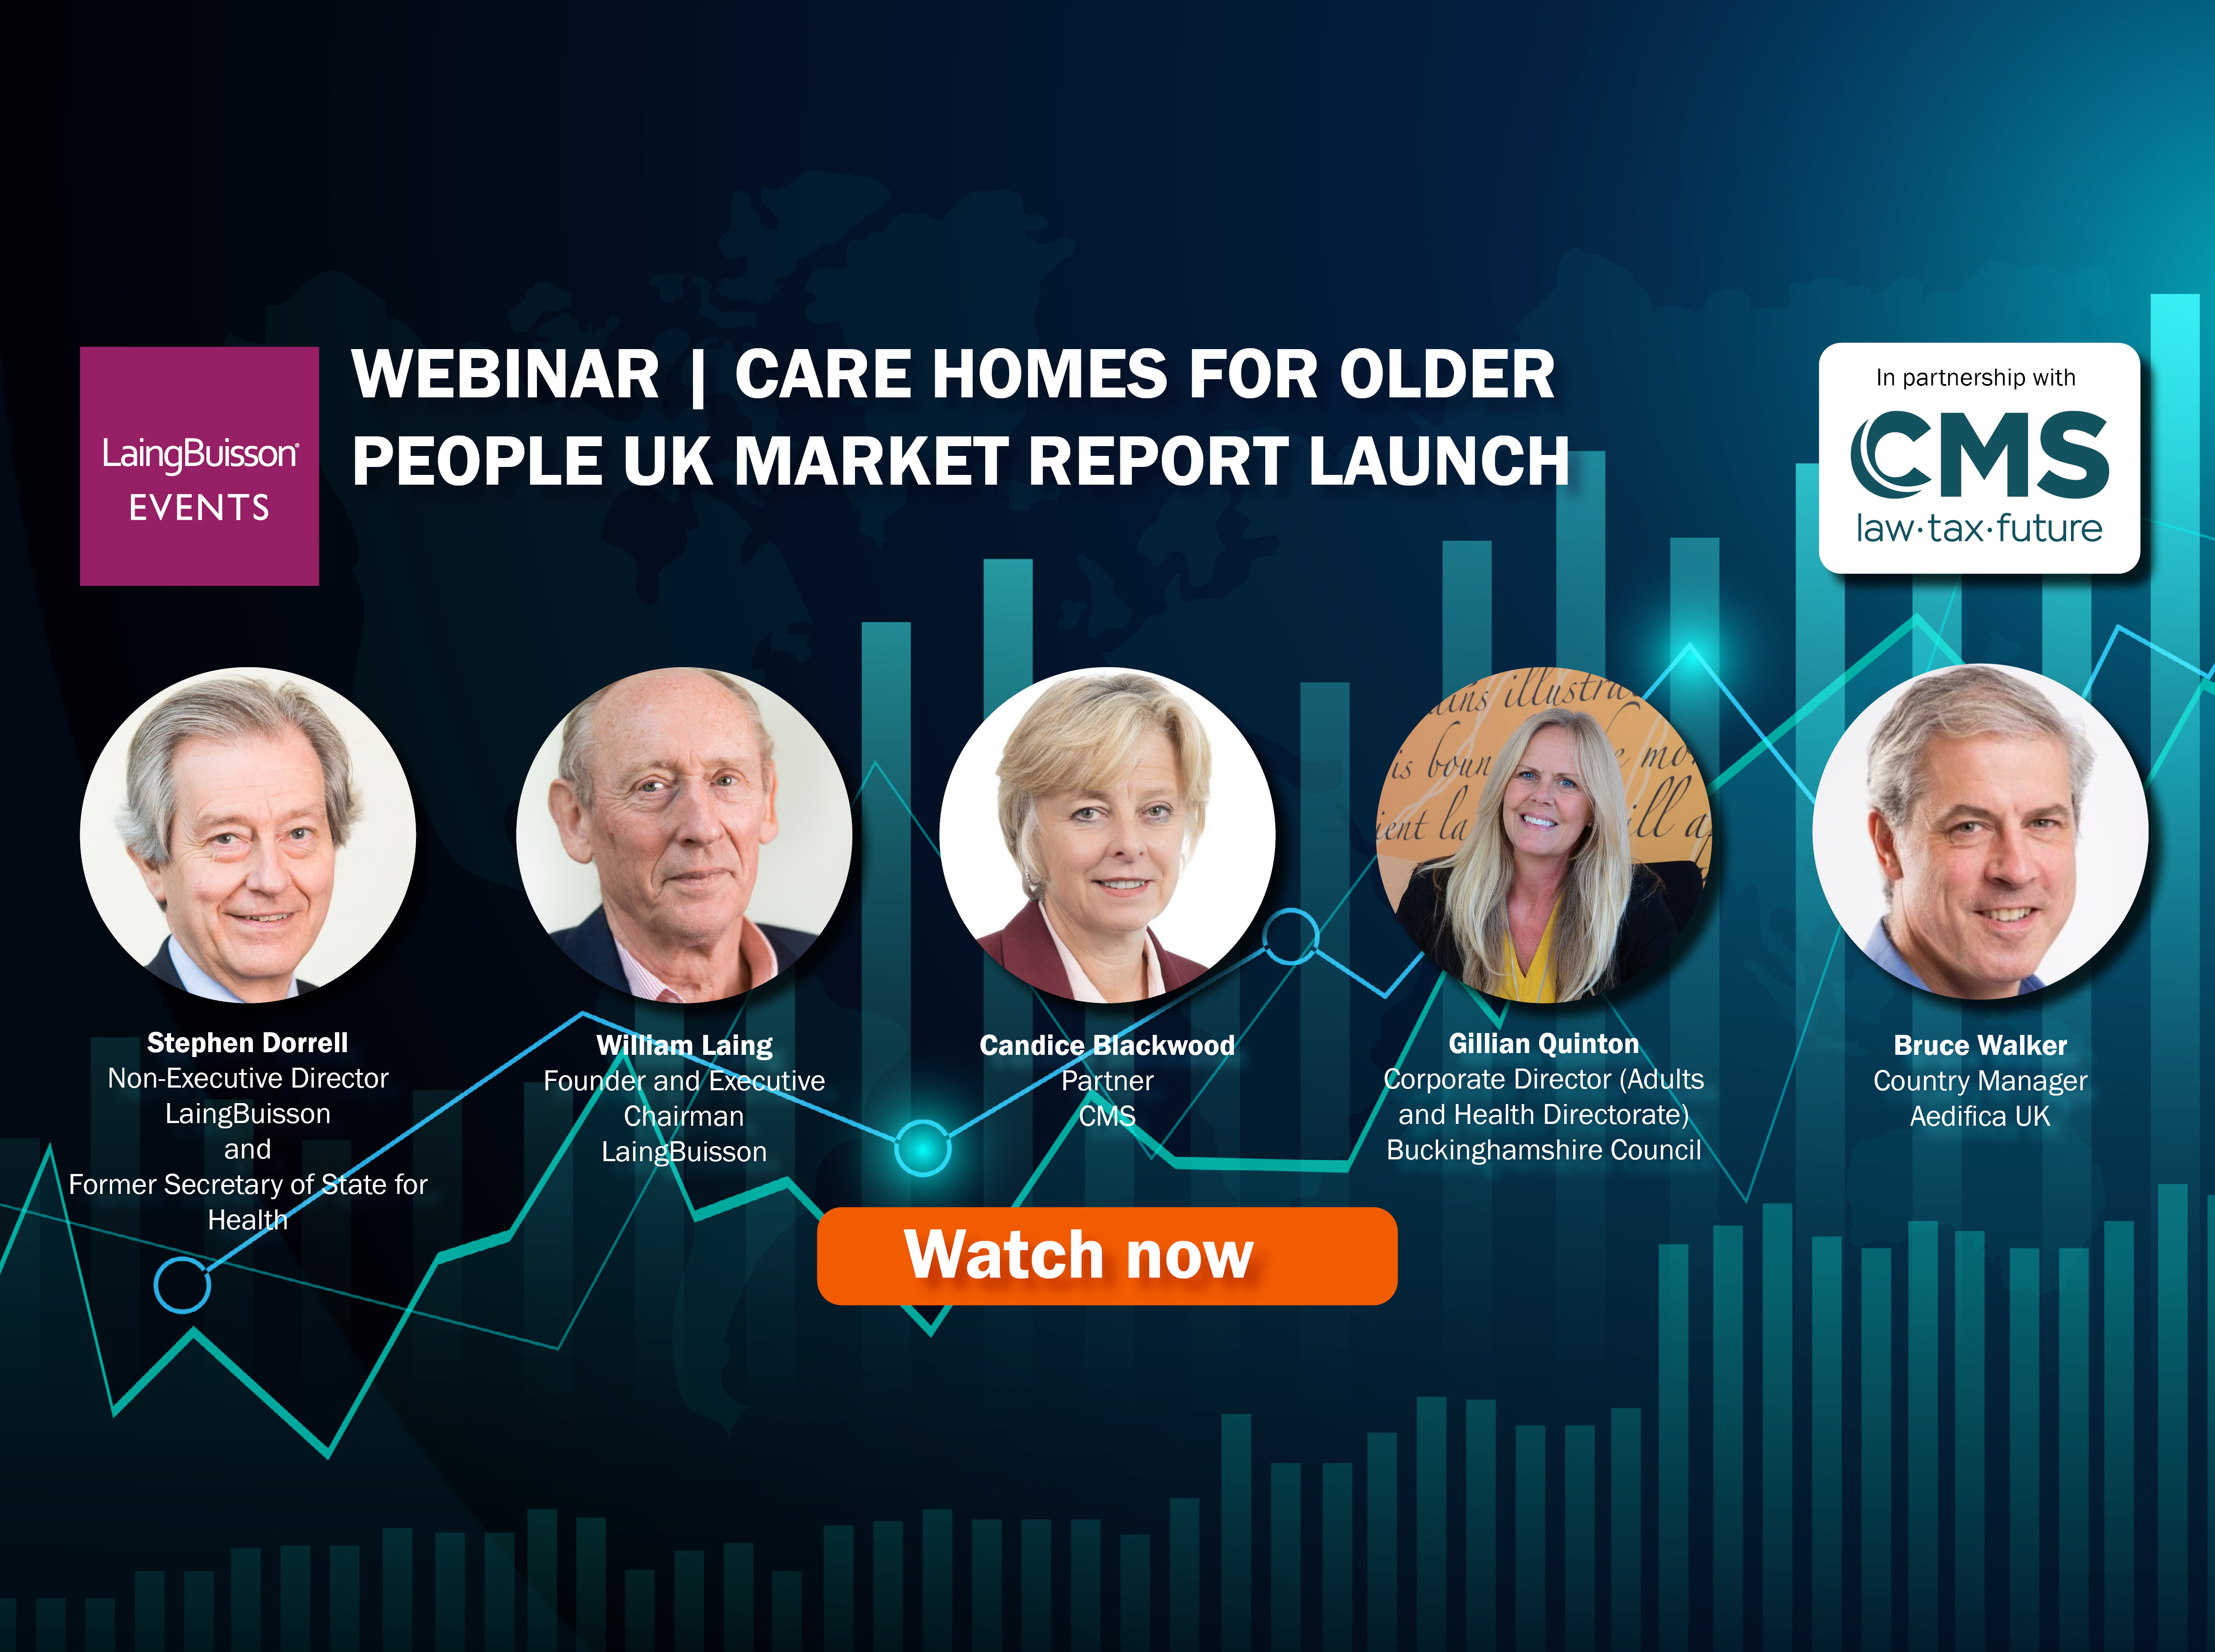 Graphic depicting the panel participating in the Care Homes for Older People UK Market Report Launch.